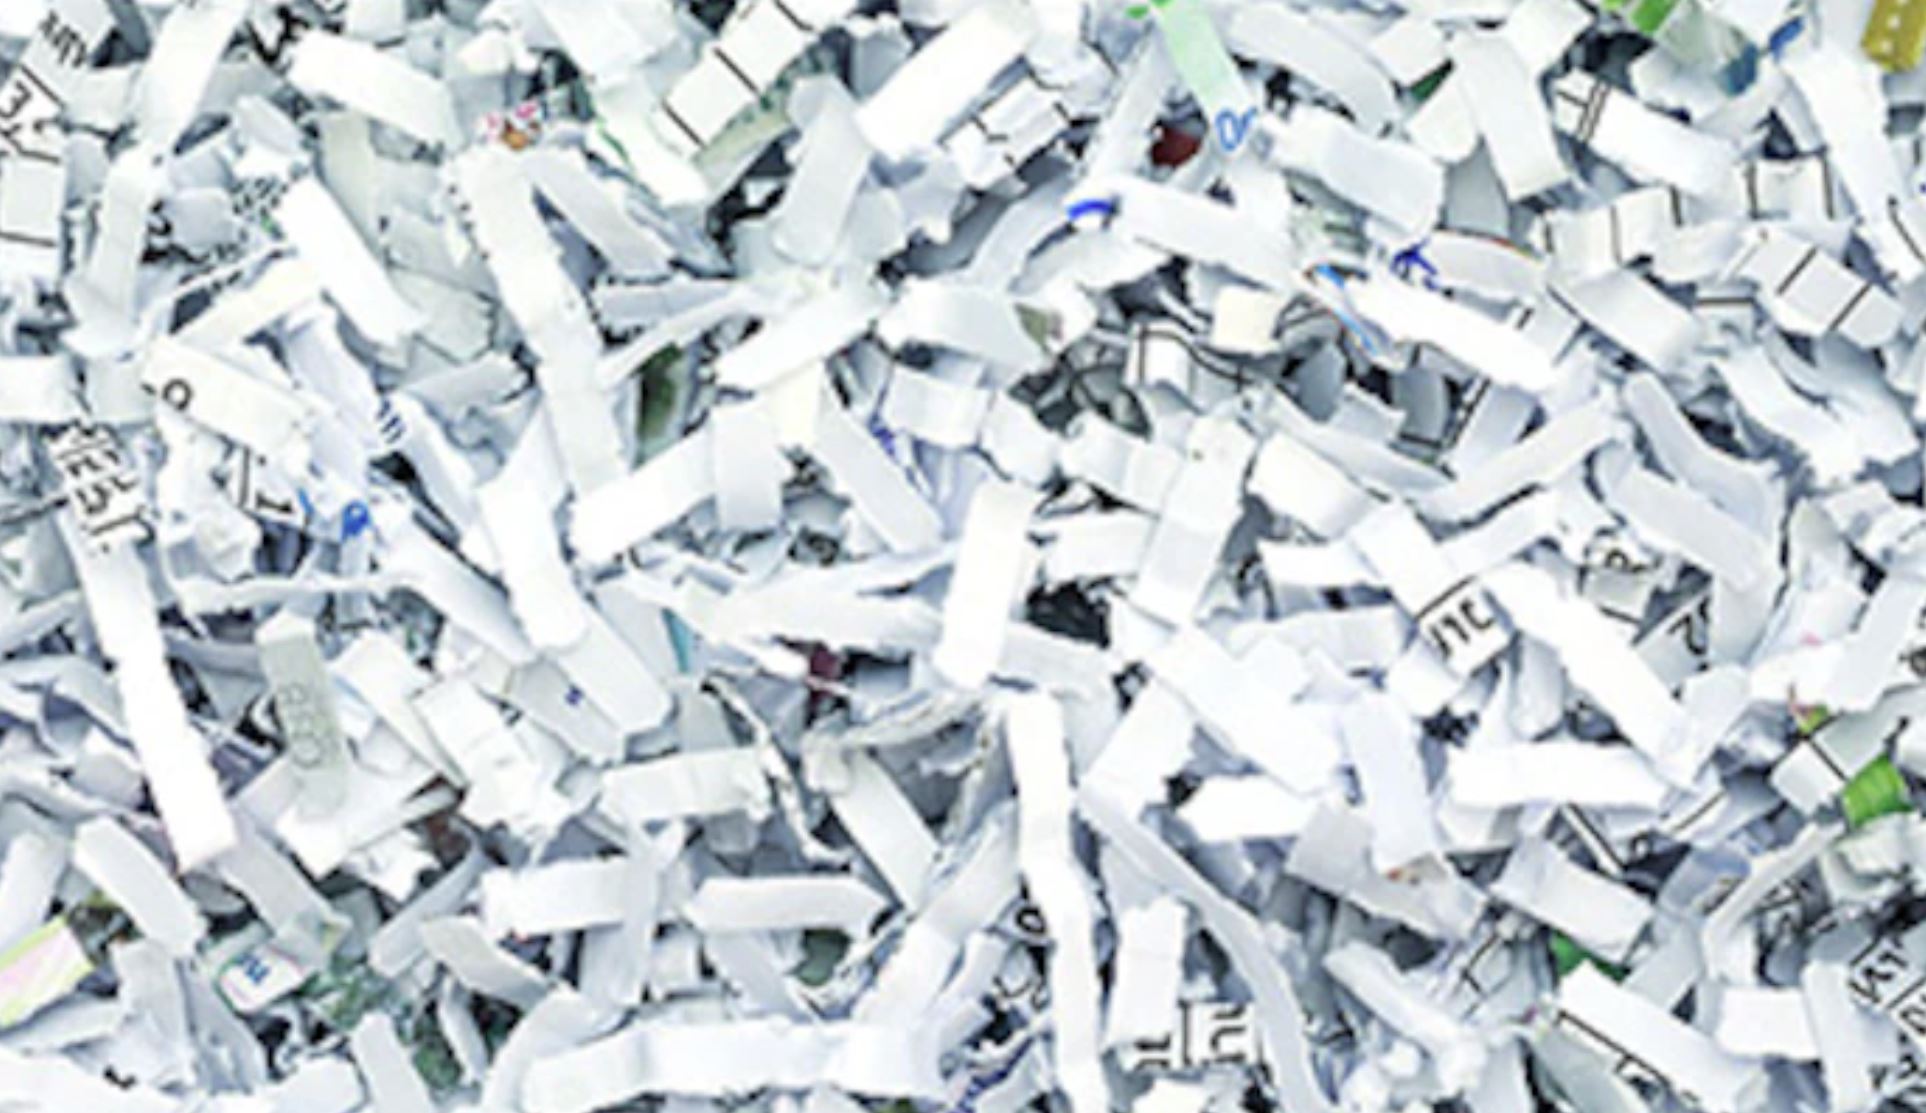 Trussville Chamber to co-host Community Shred Day